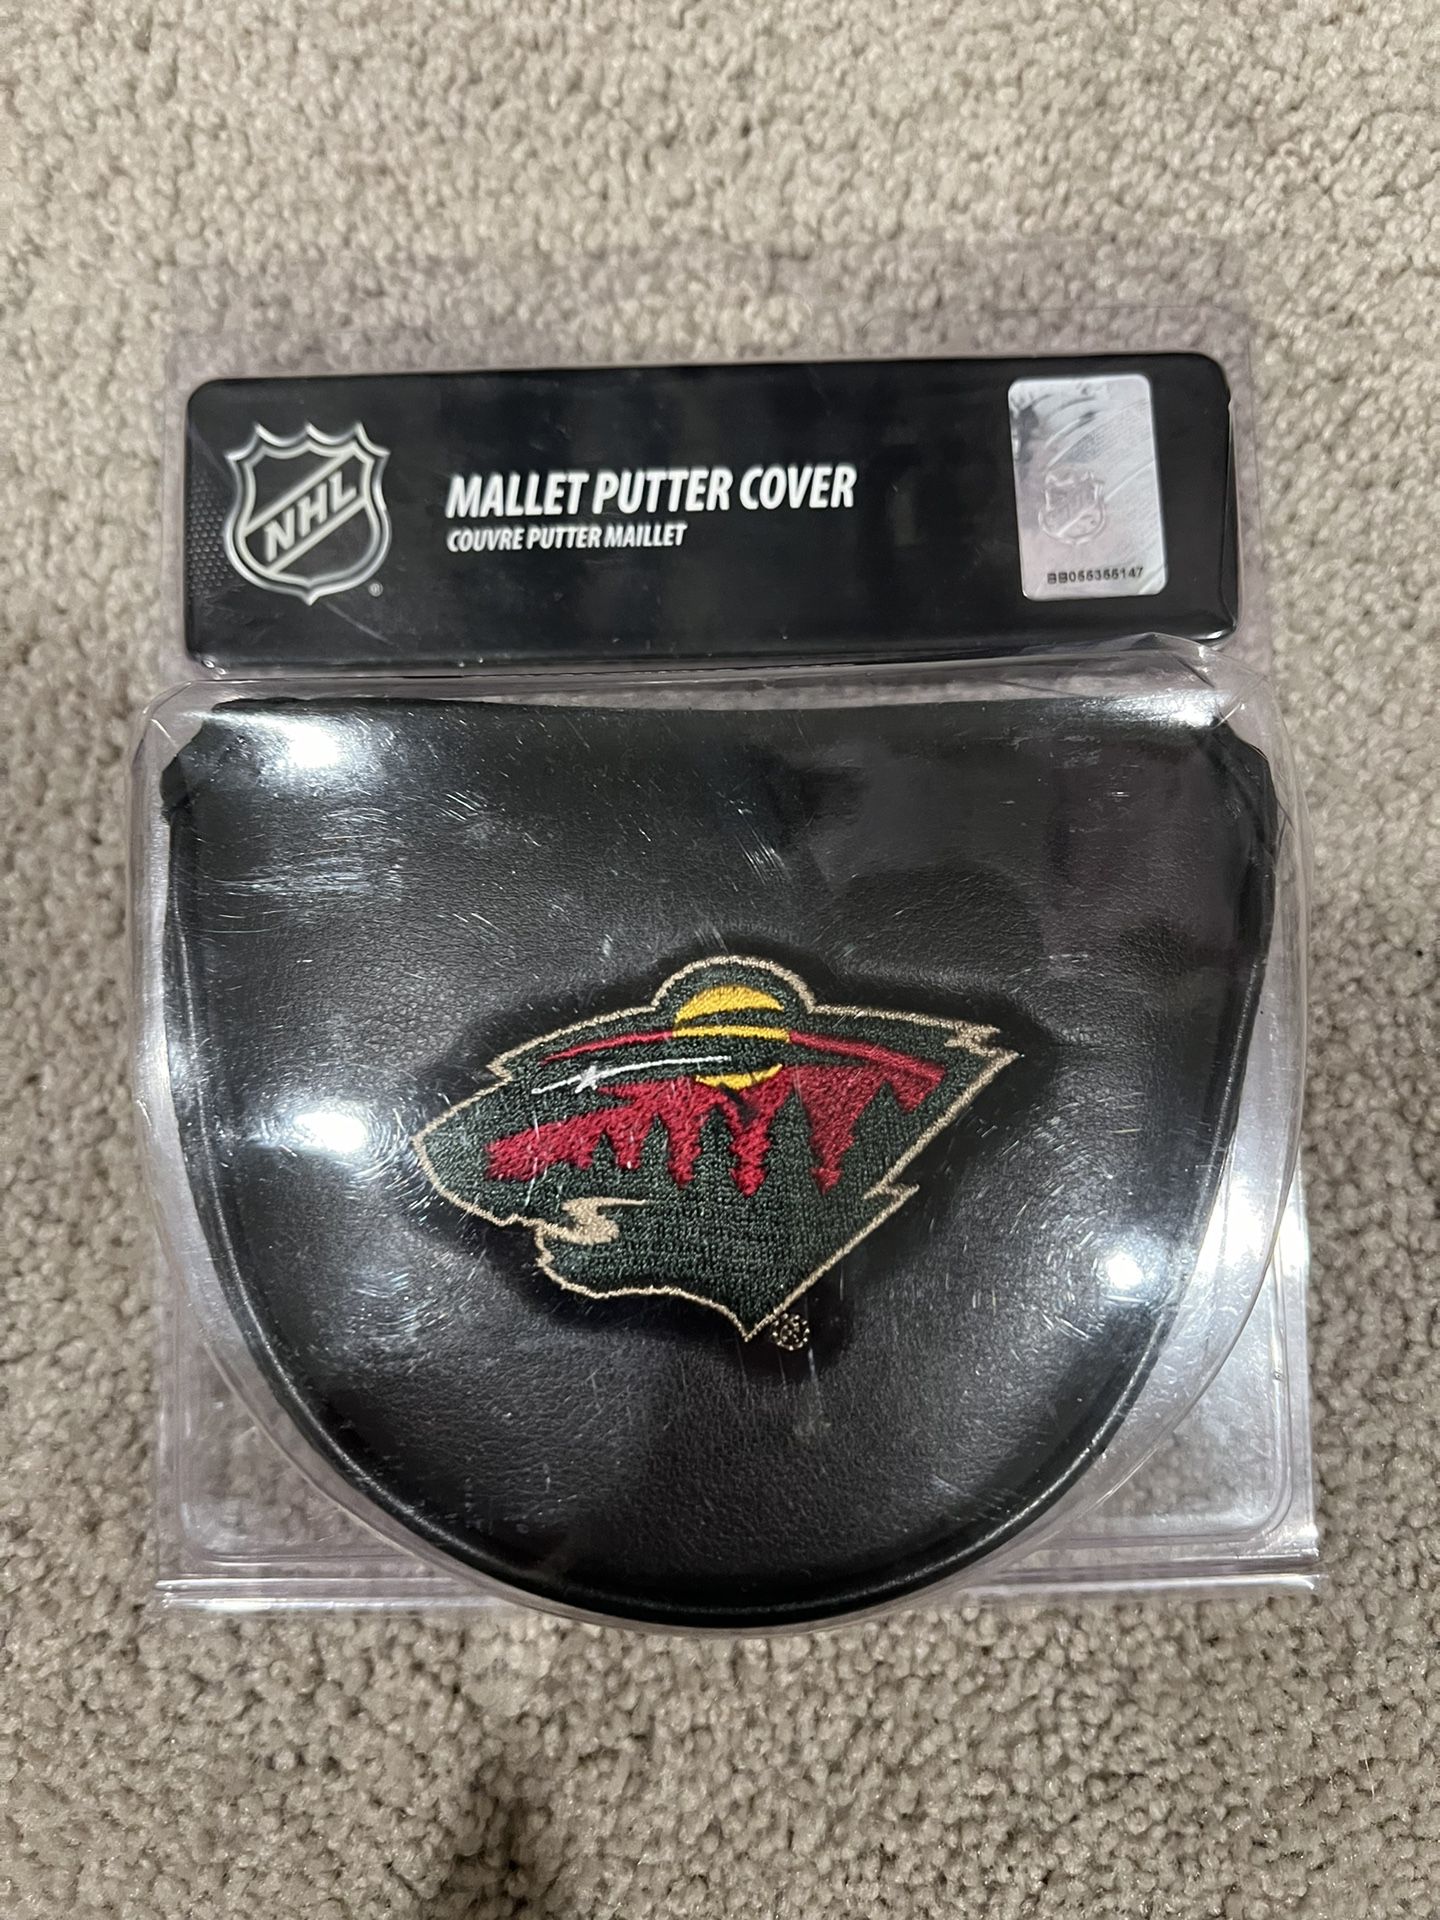 Minnesota Wild NHL Mallet Putter Golf Club Head Cover - Embroidered NEW